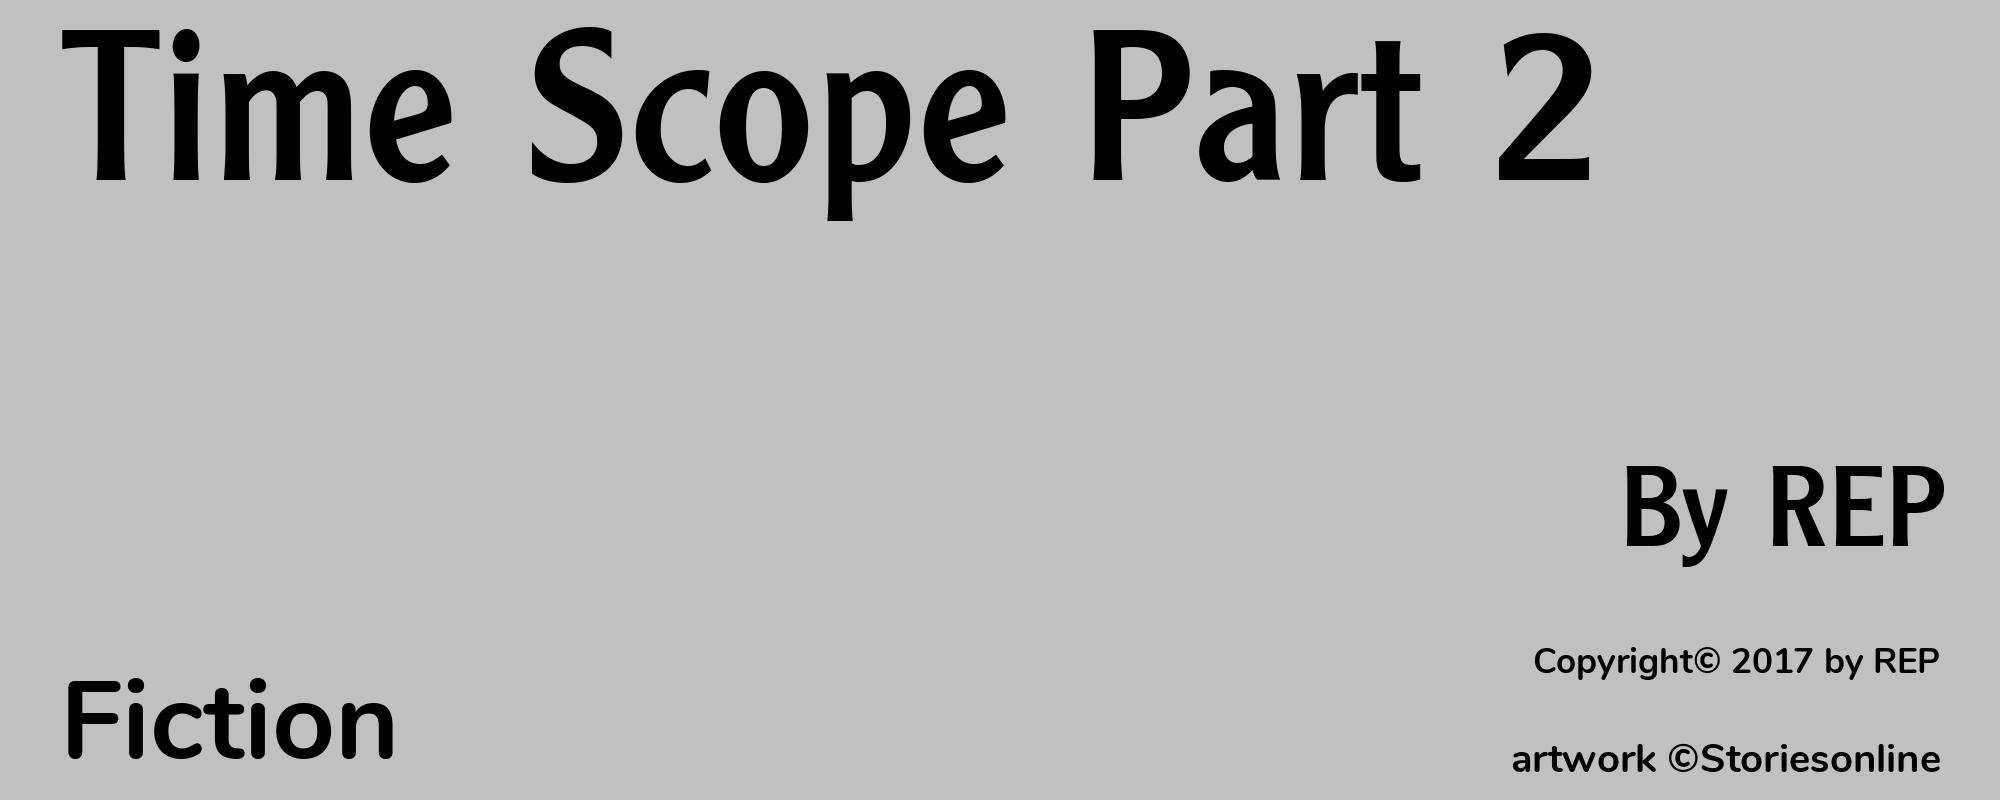 Time Scope Part 2 - Cover